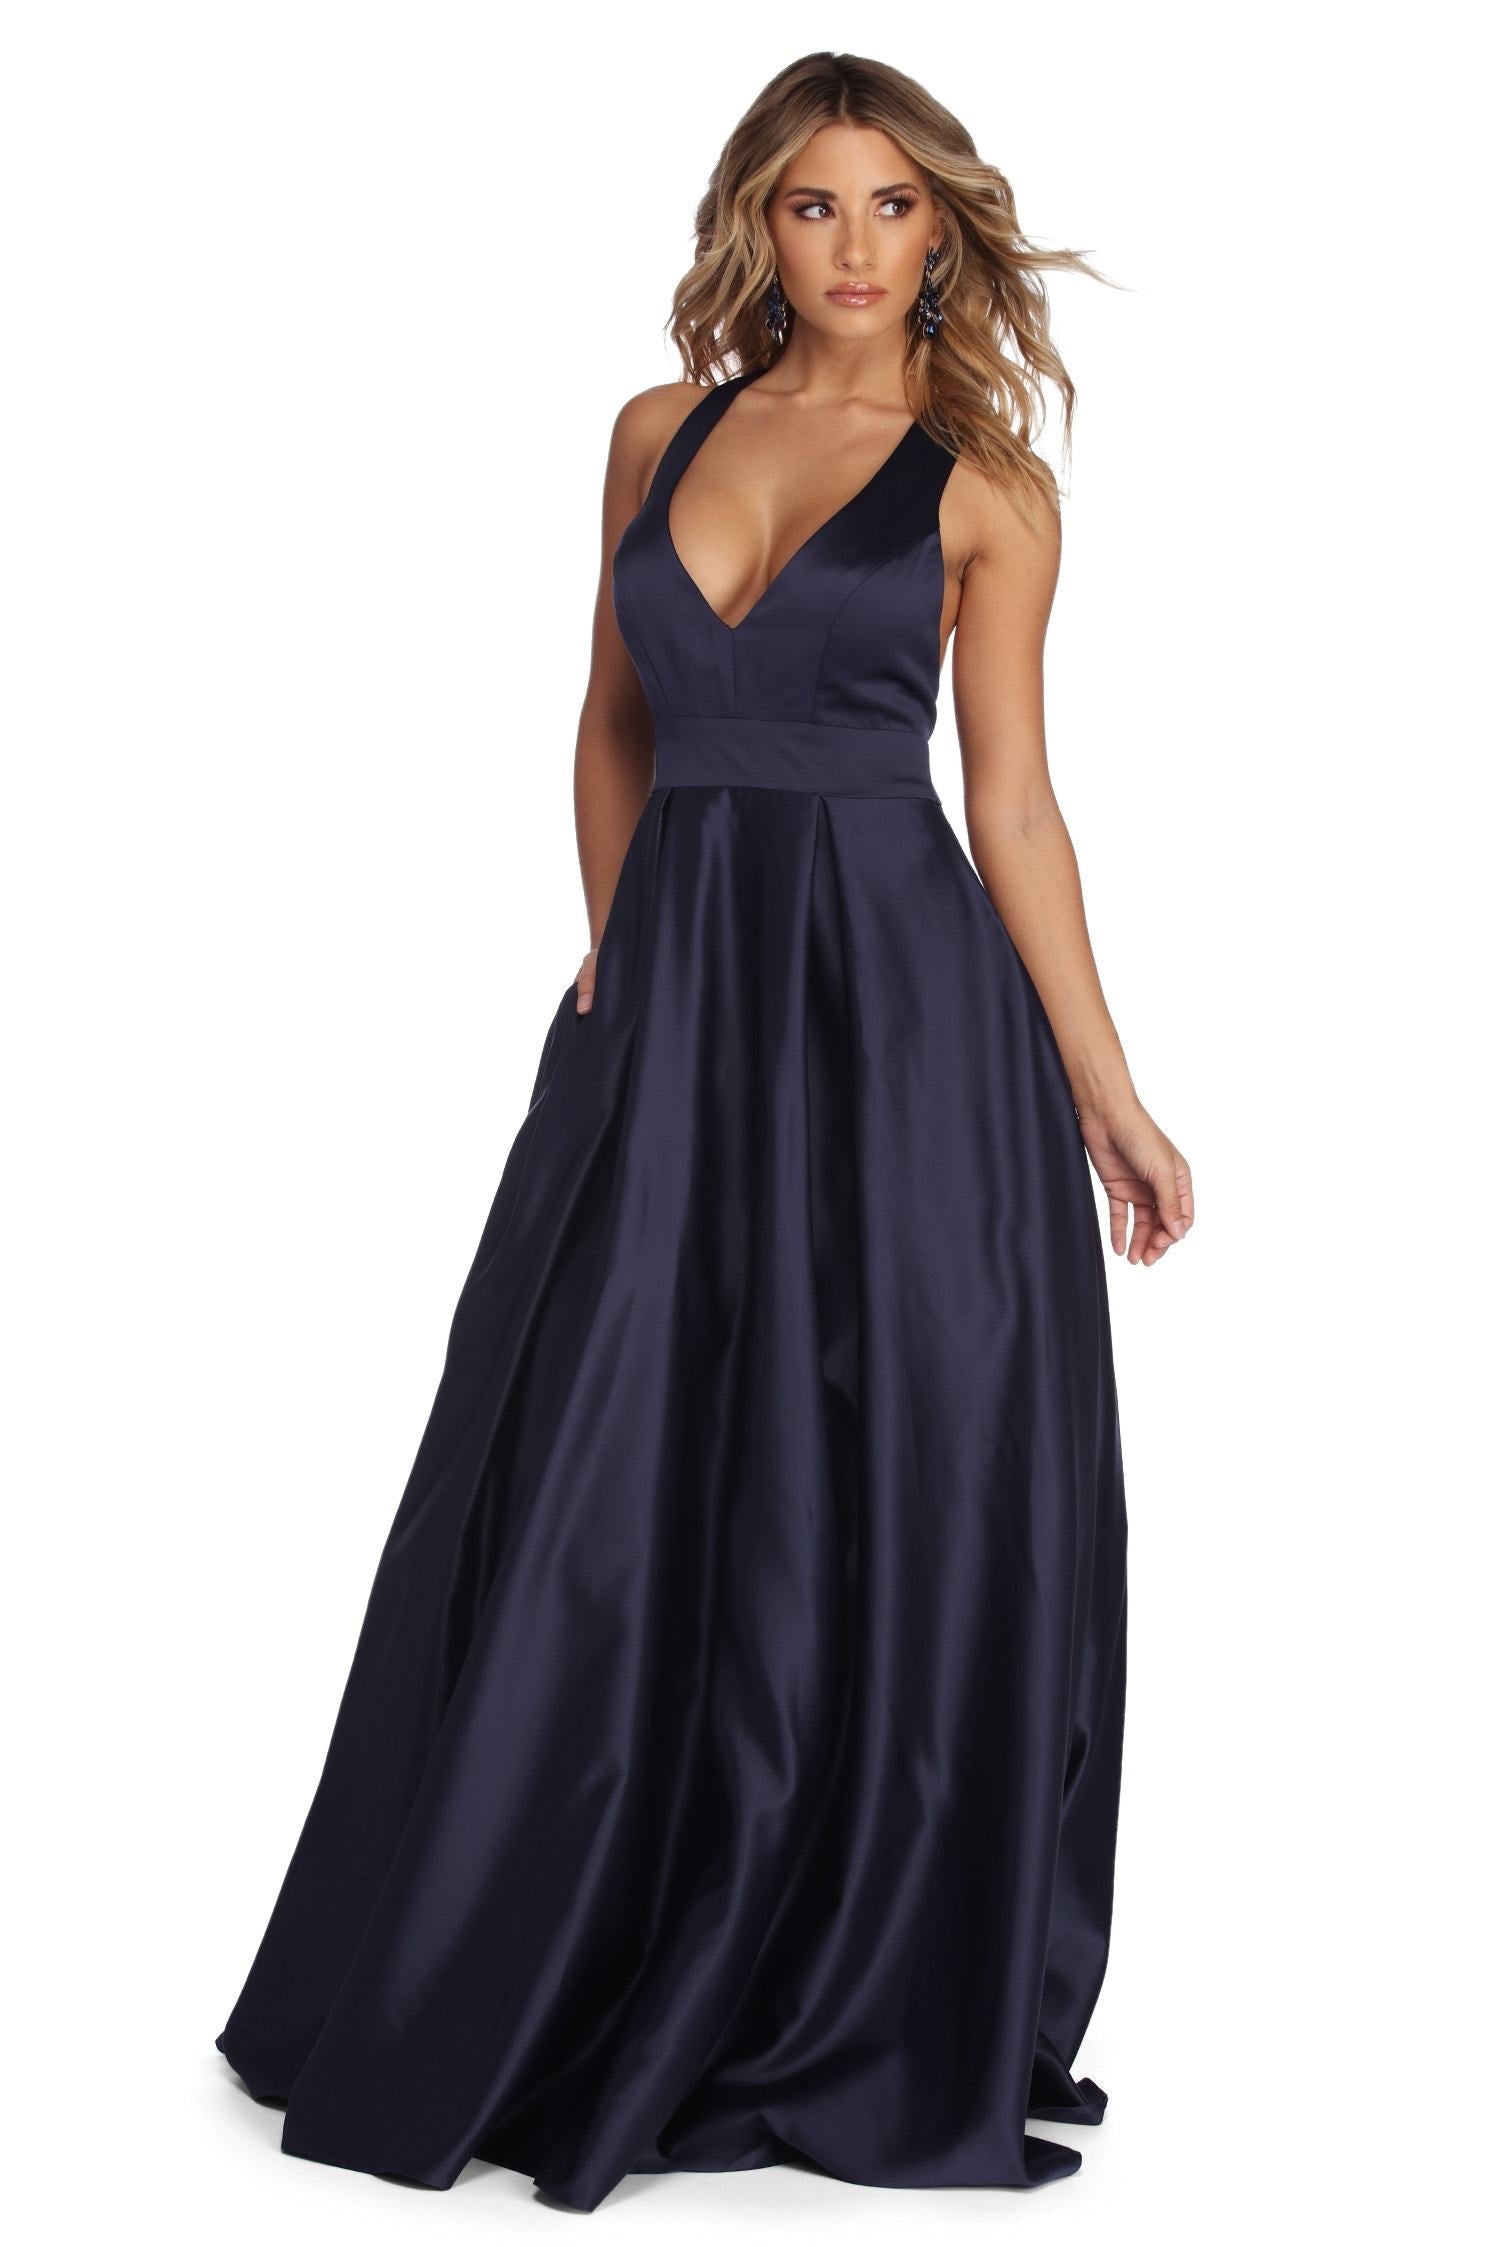 Elle Formal Satin Ball Gown - Lady Occasions